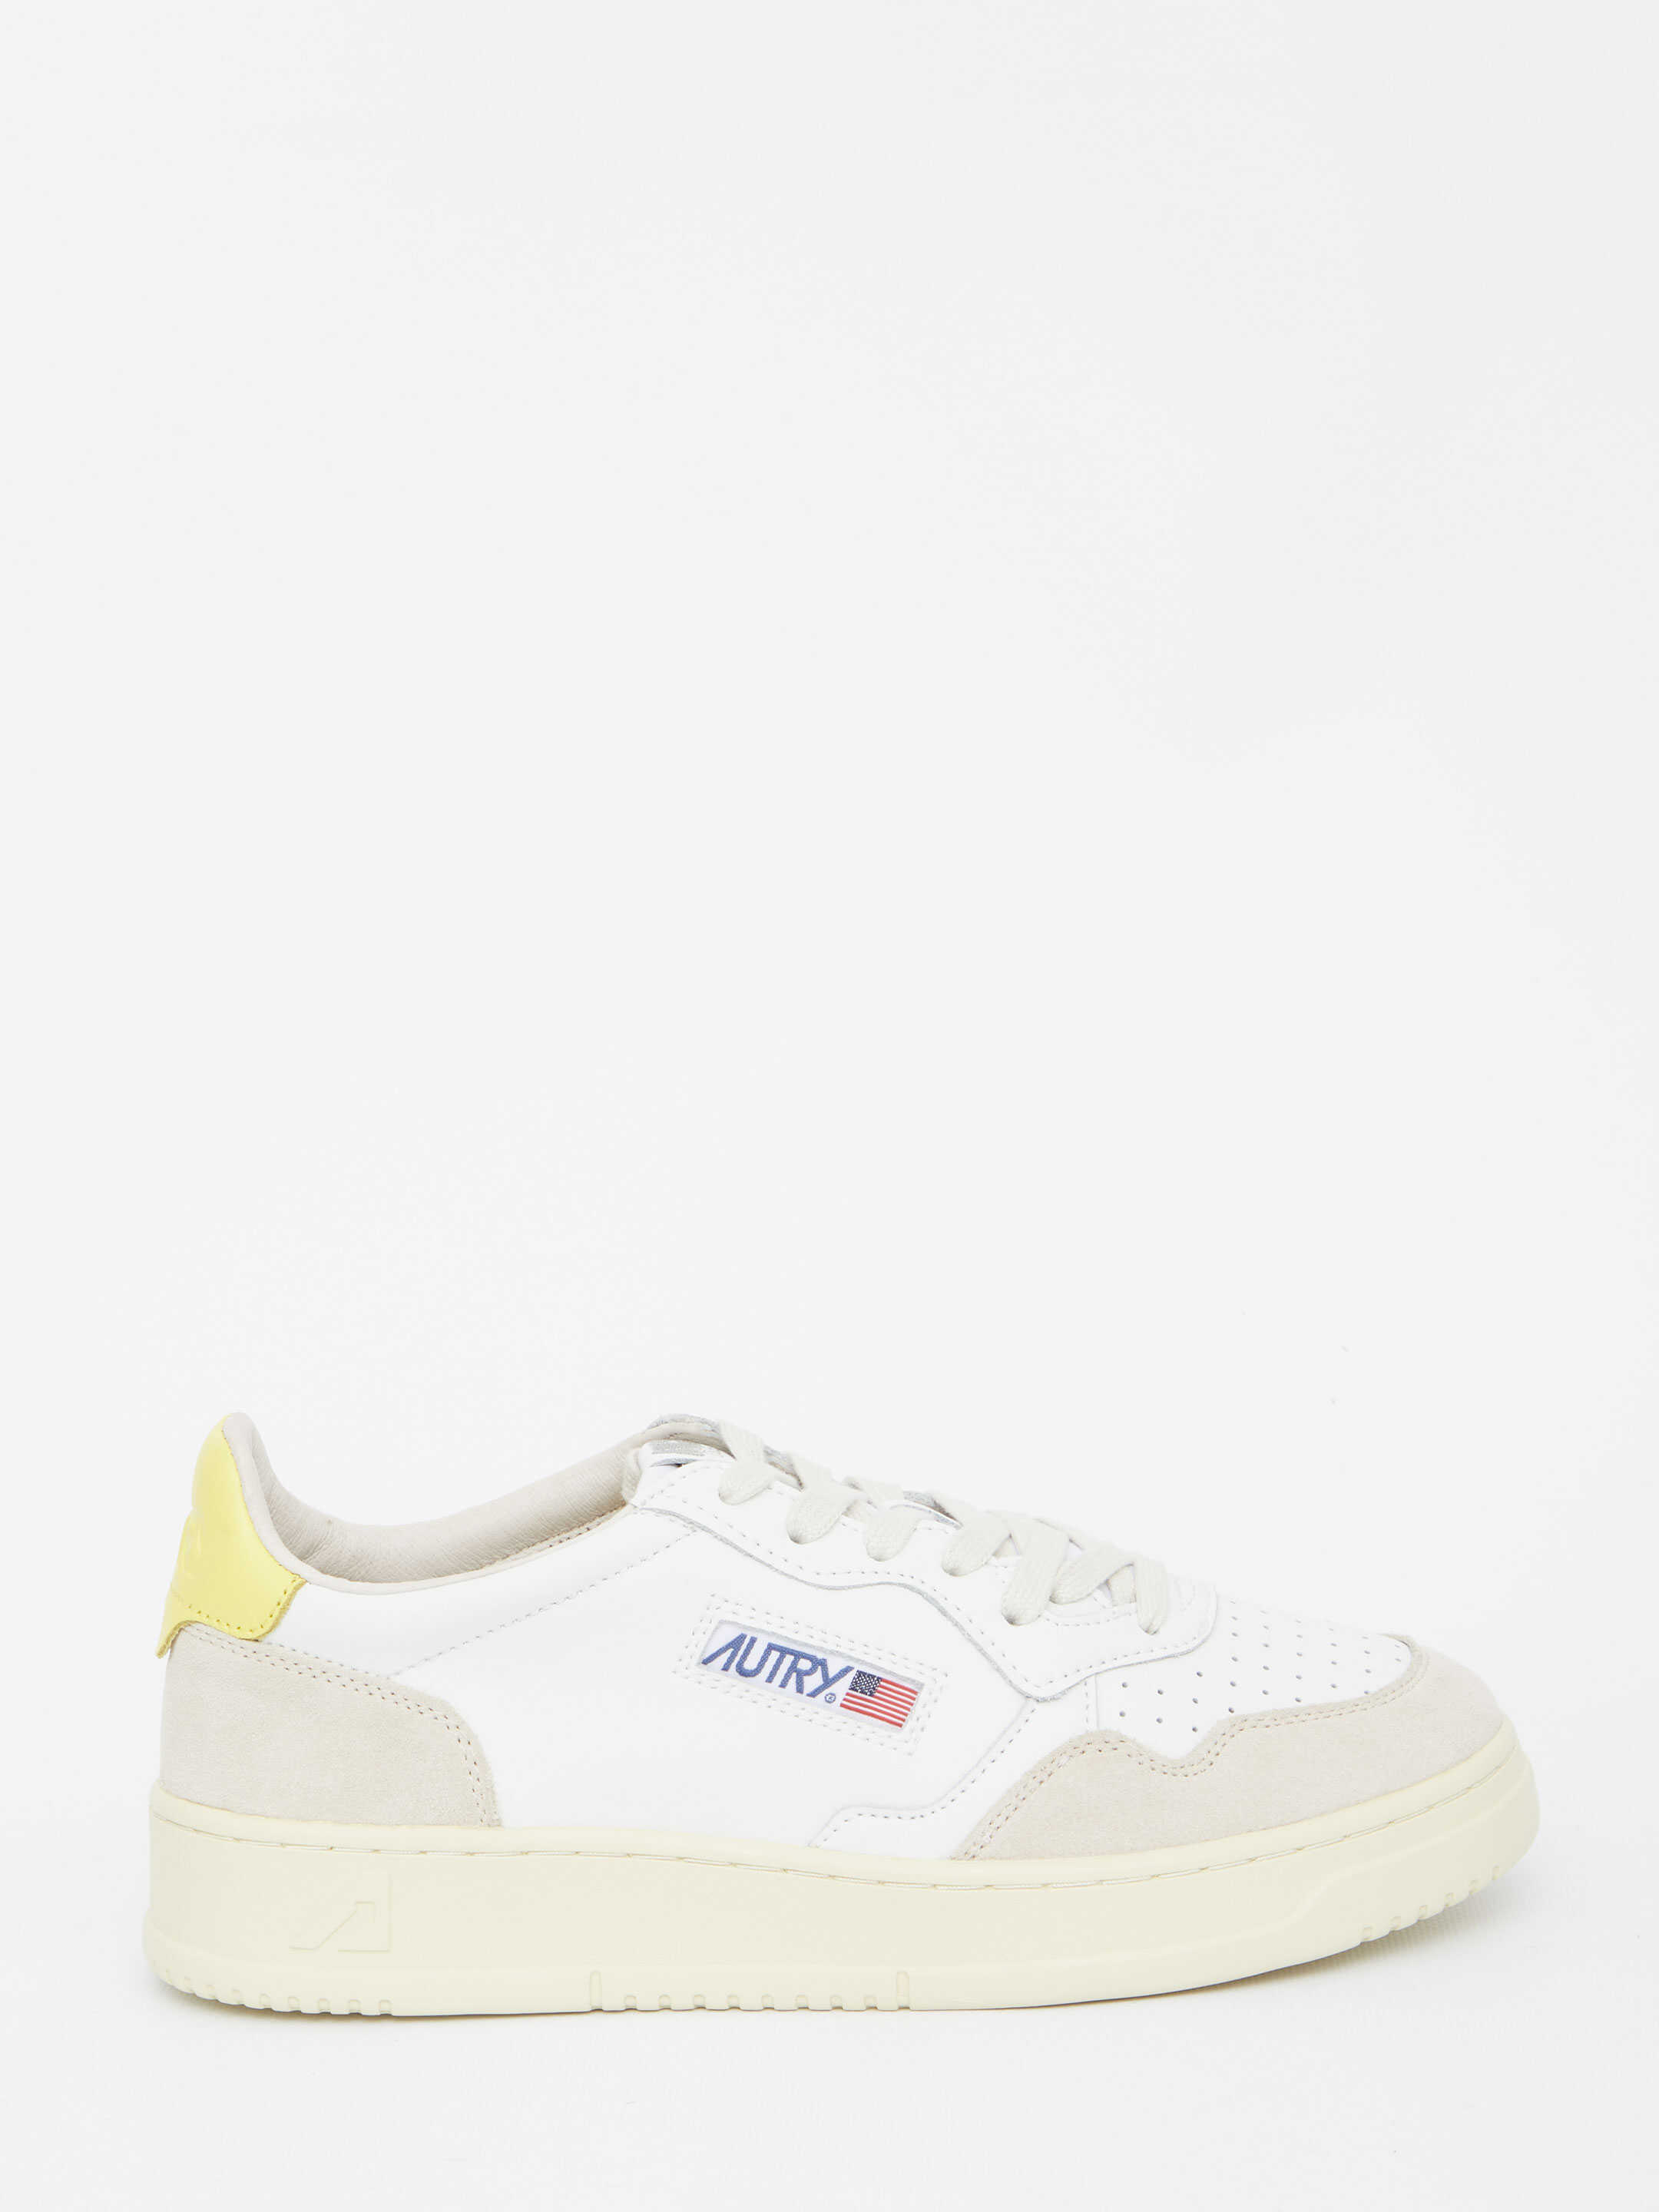 AUTRY Medalist Suede Sneakers White